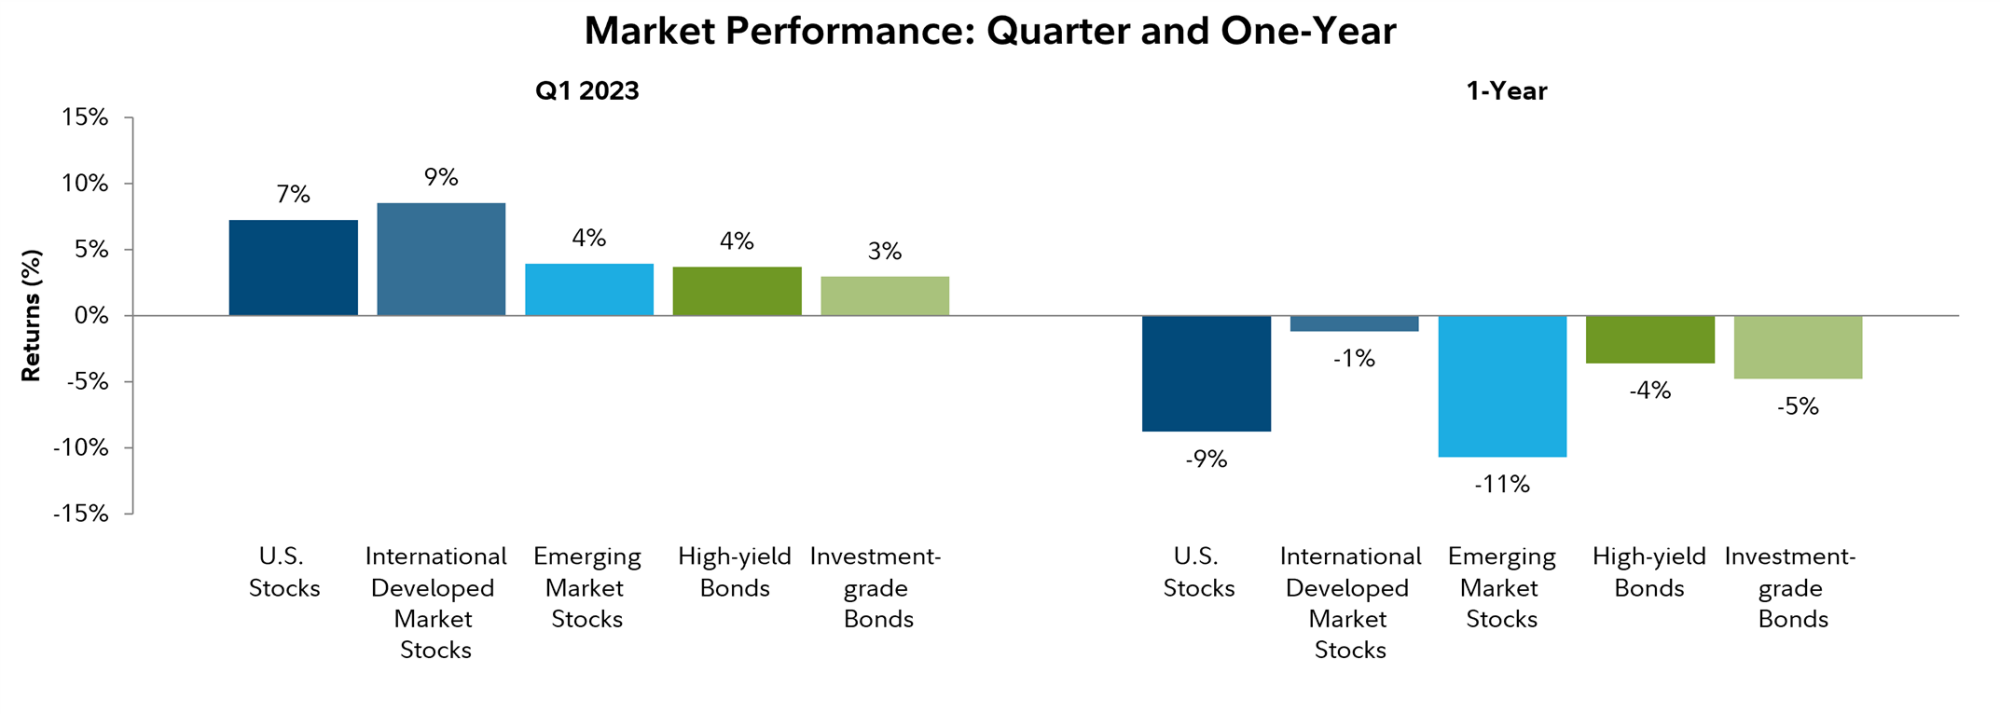 Market Performance: Quarter and One-Year 2023 Q1